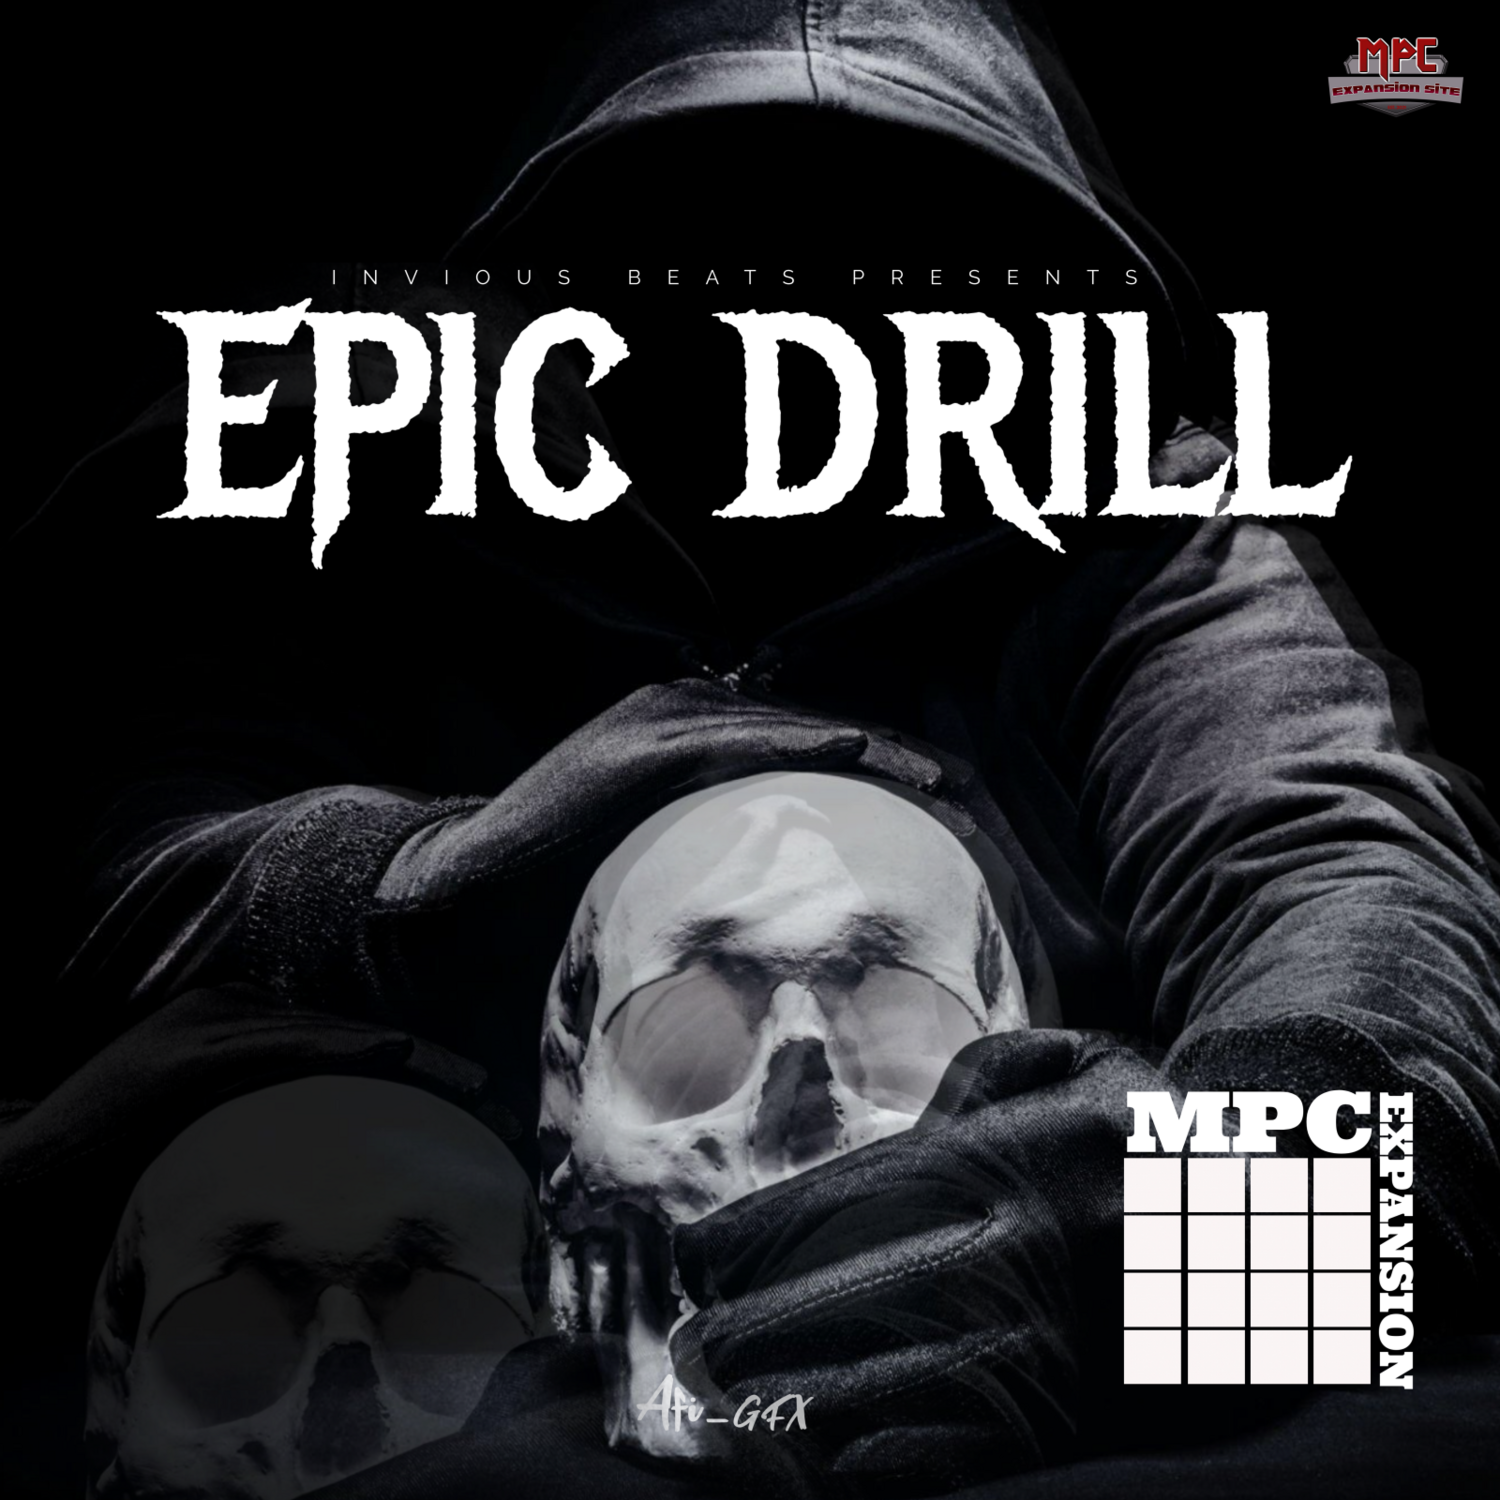 MPC EXPANSION 'EPIC DRILL' by INVIOUS